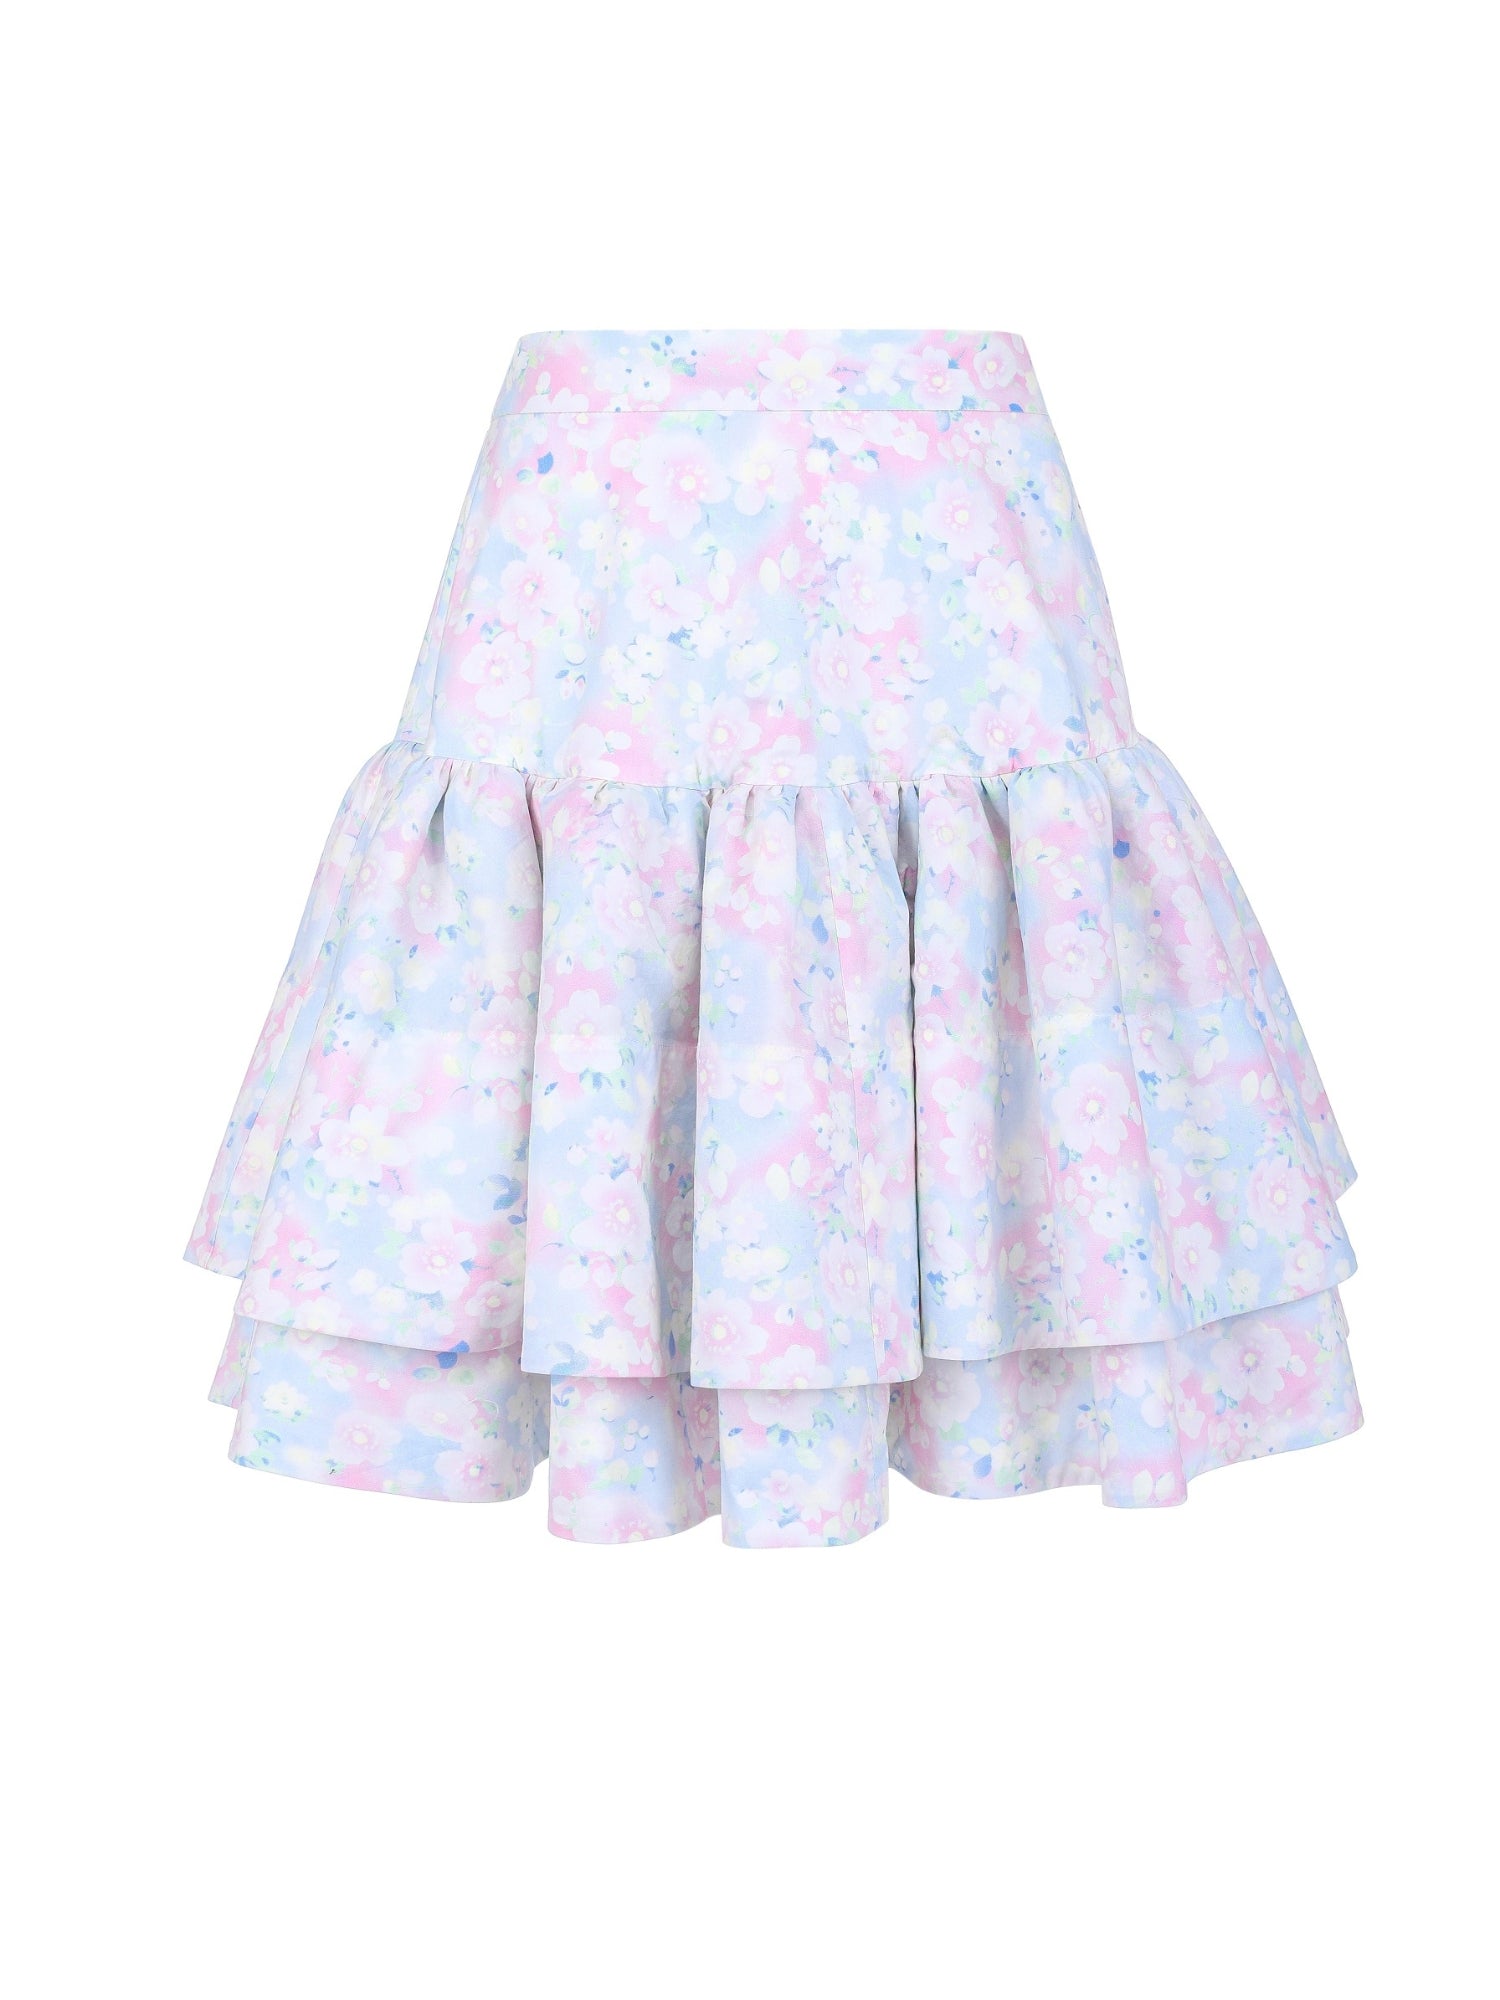 The Pastel Bouquet Beverly Hills Skirt, Bottoms, Selkie - Ivory Sheep Collection Limited